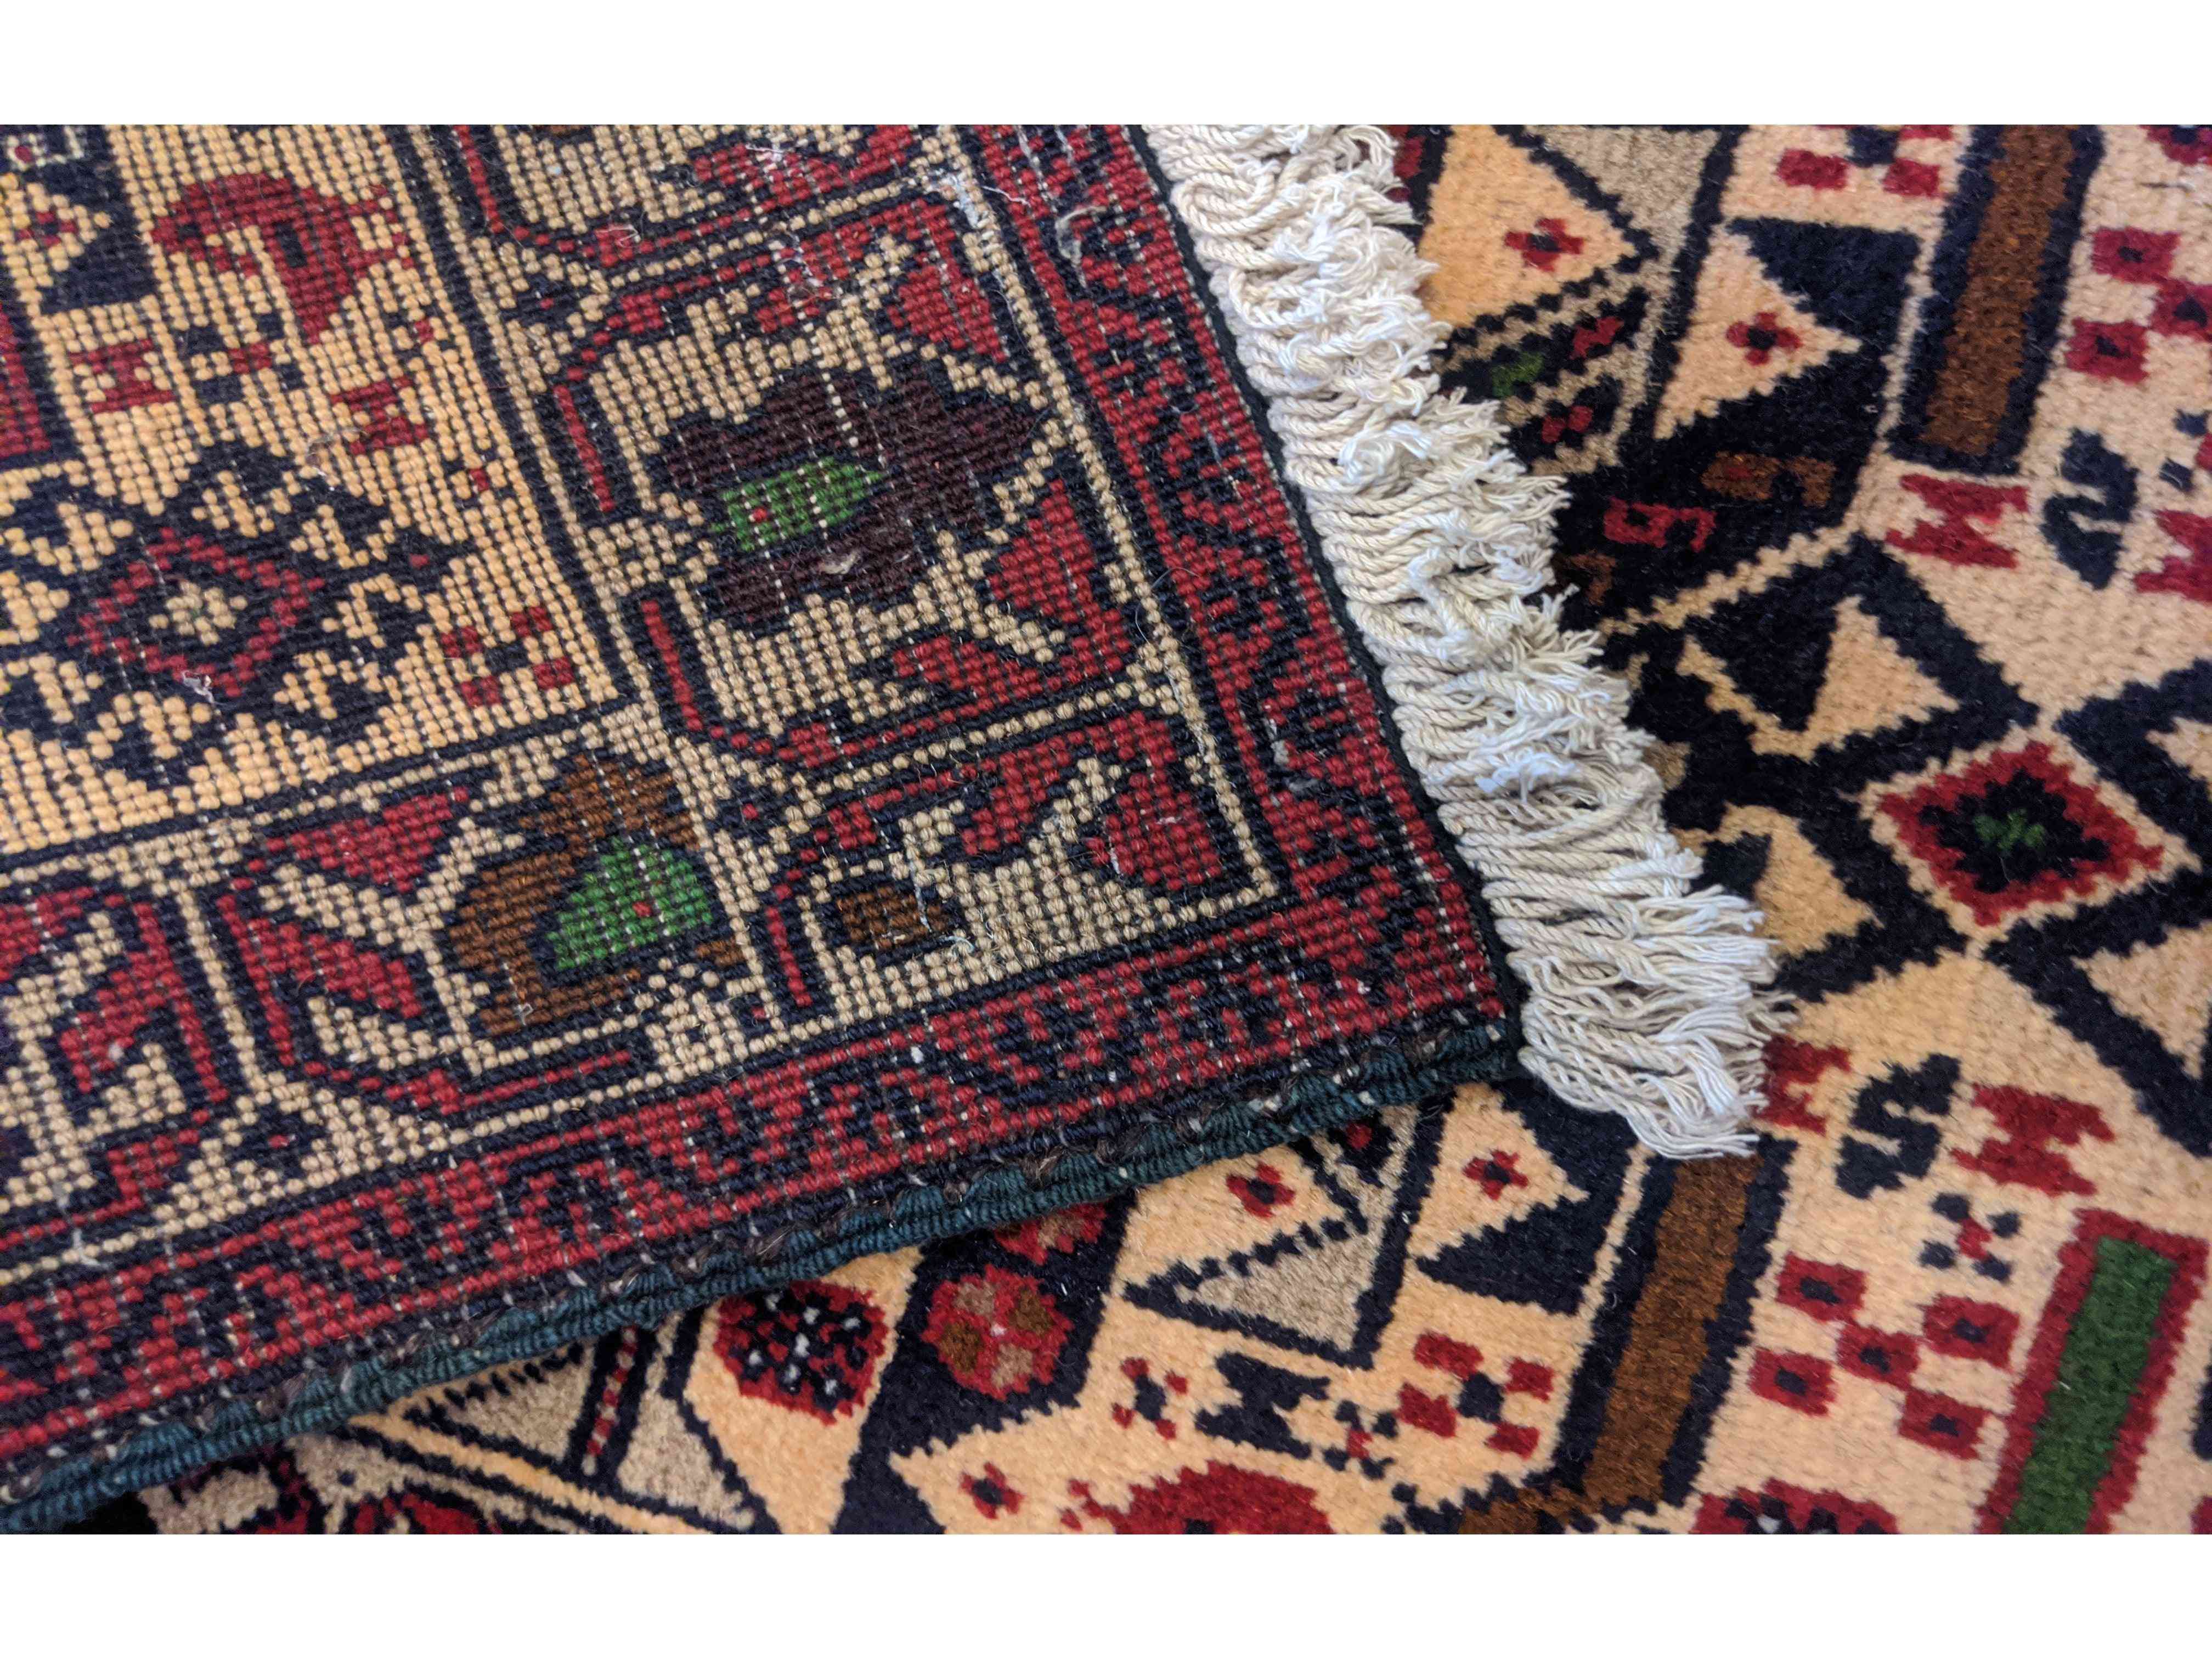 290 x 61 cm Persian Baluch Traditional Red Rug - Rugmaster